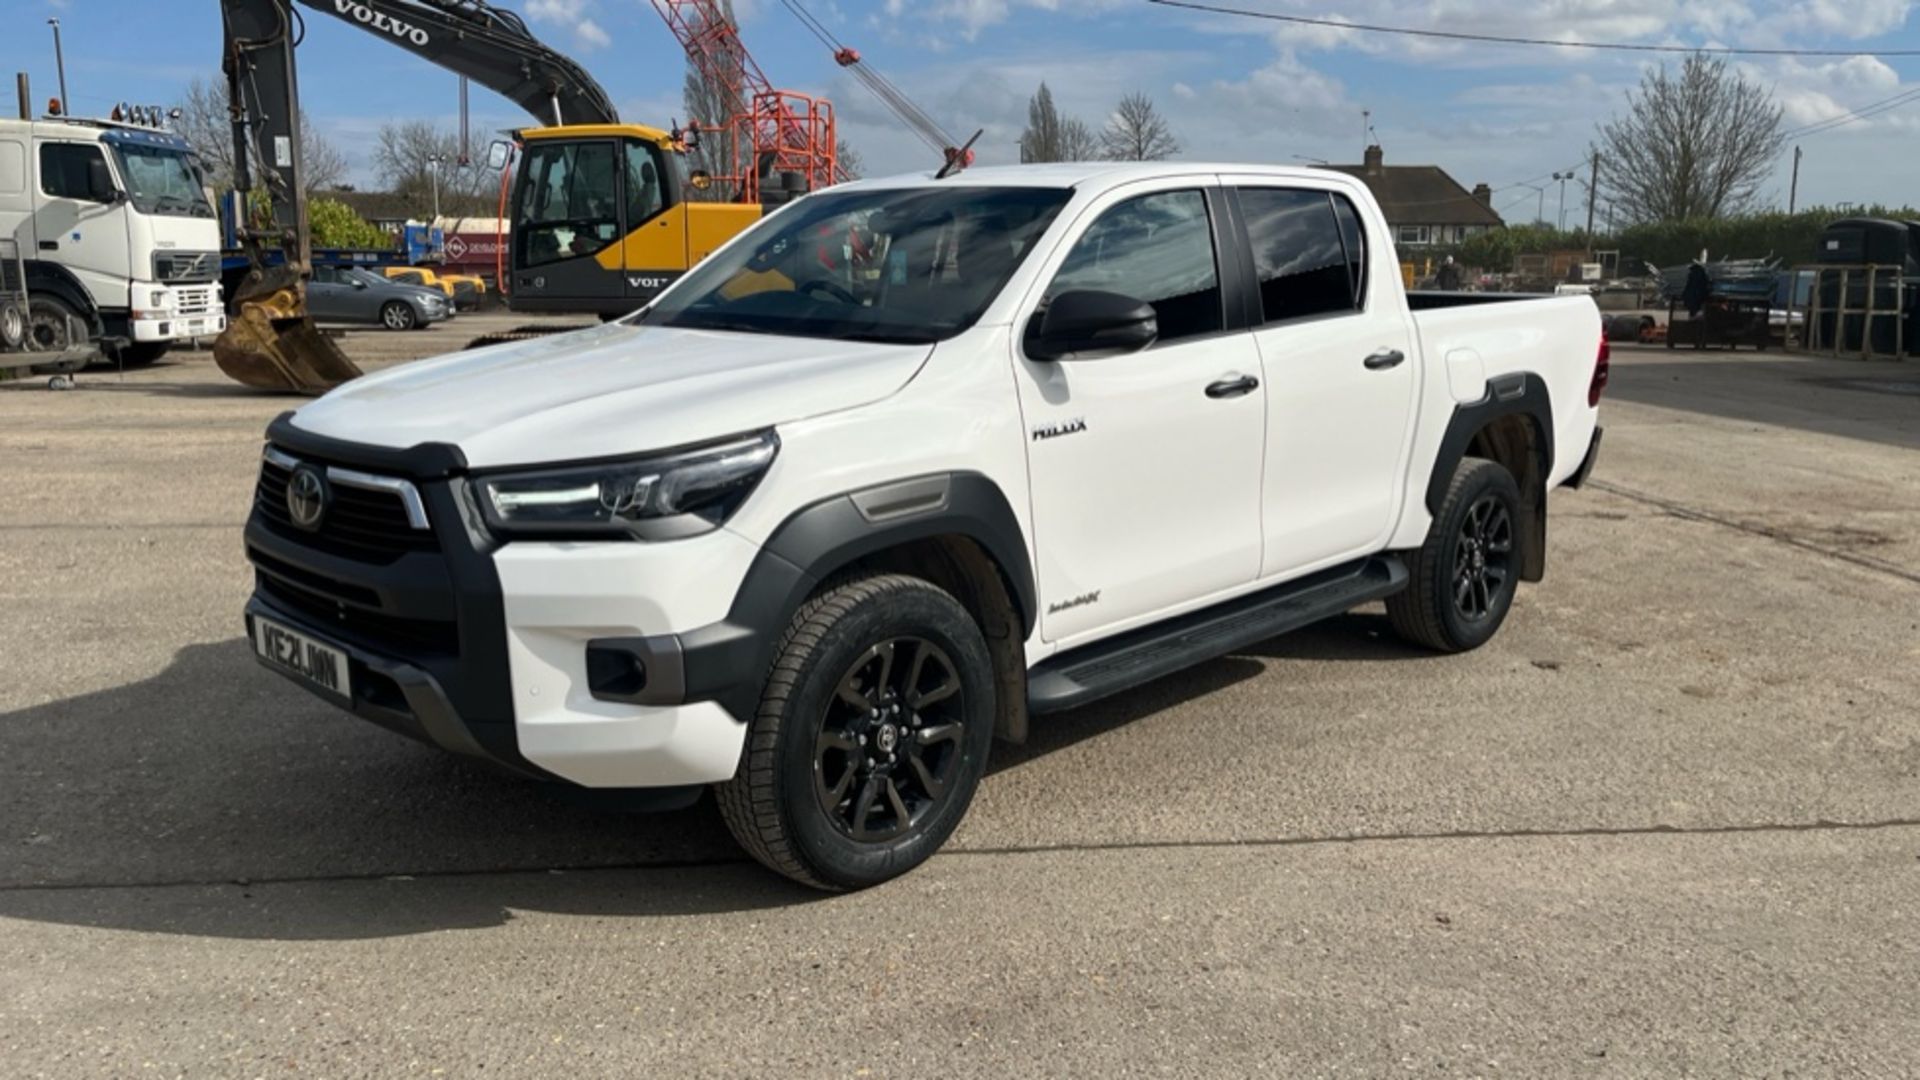 TOYOTA HILUX 2.8 D-4D INVINCIBLE X Pickup Double Cab Diesel Automatic (YEAR 2021) - Image 2 of 21